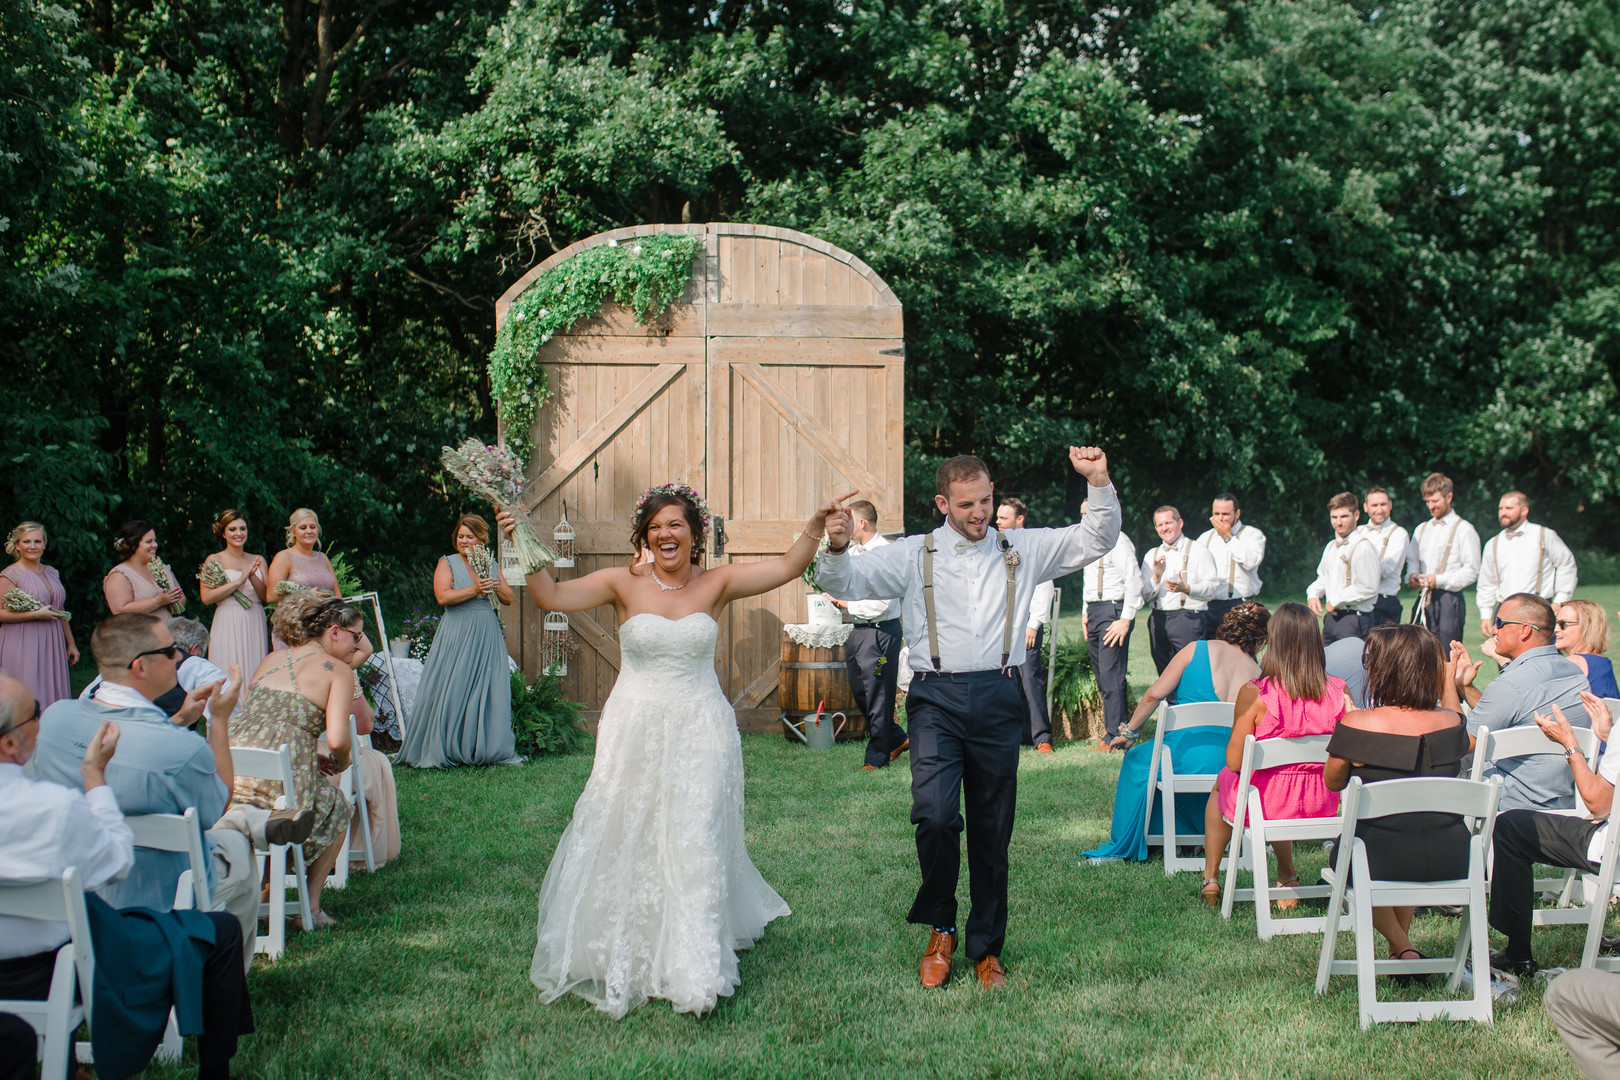 Just married: Rustic country wedding in Minooka, IL captured by Katie Brsan Photography. Visit CHItheeWED.com for more wedding inspiration!